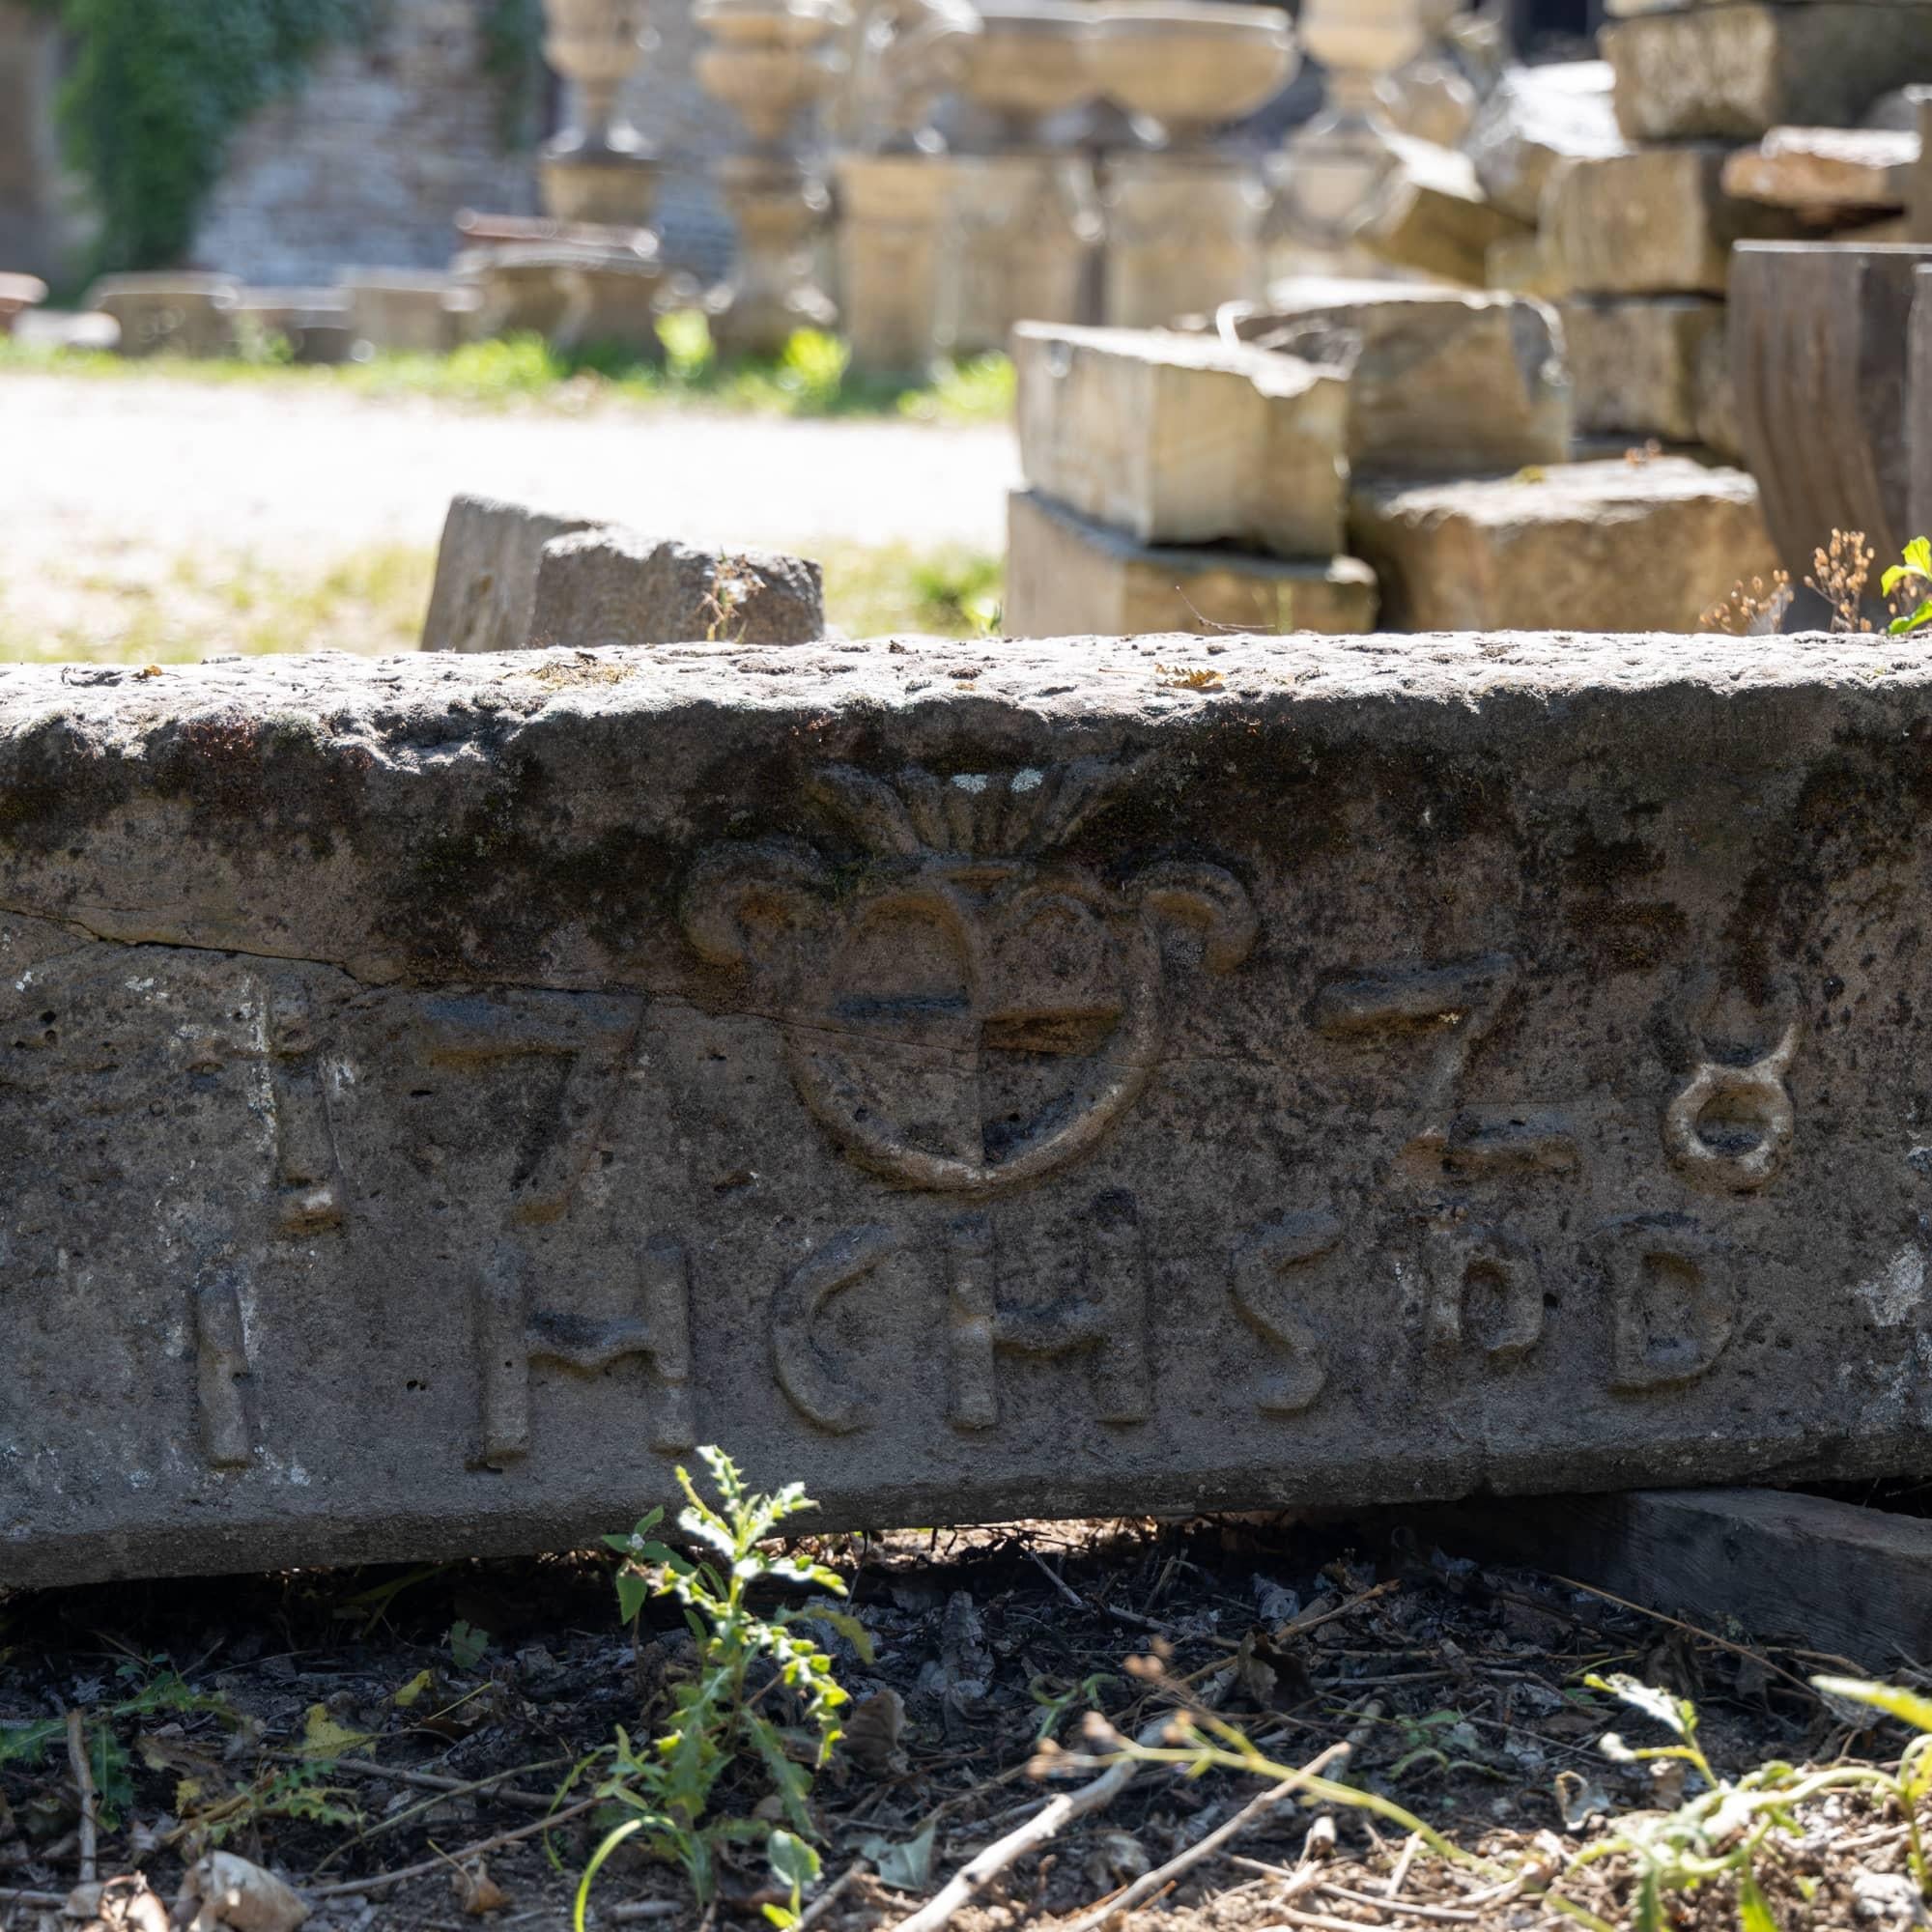 Large lintel of a portal made of sandstone. The stone block is dated 1778 with a central coat of arms and comes from the deconstruction of a house in Franconia.